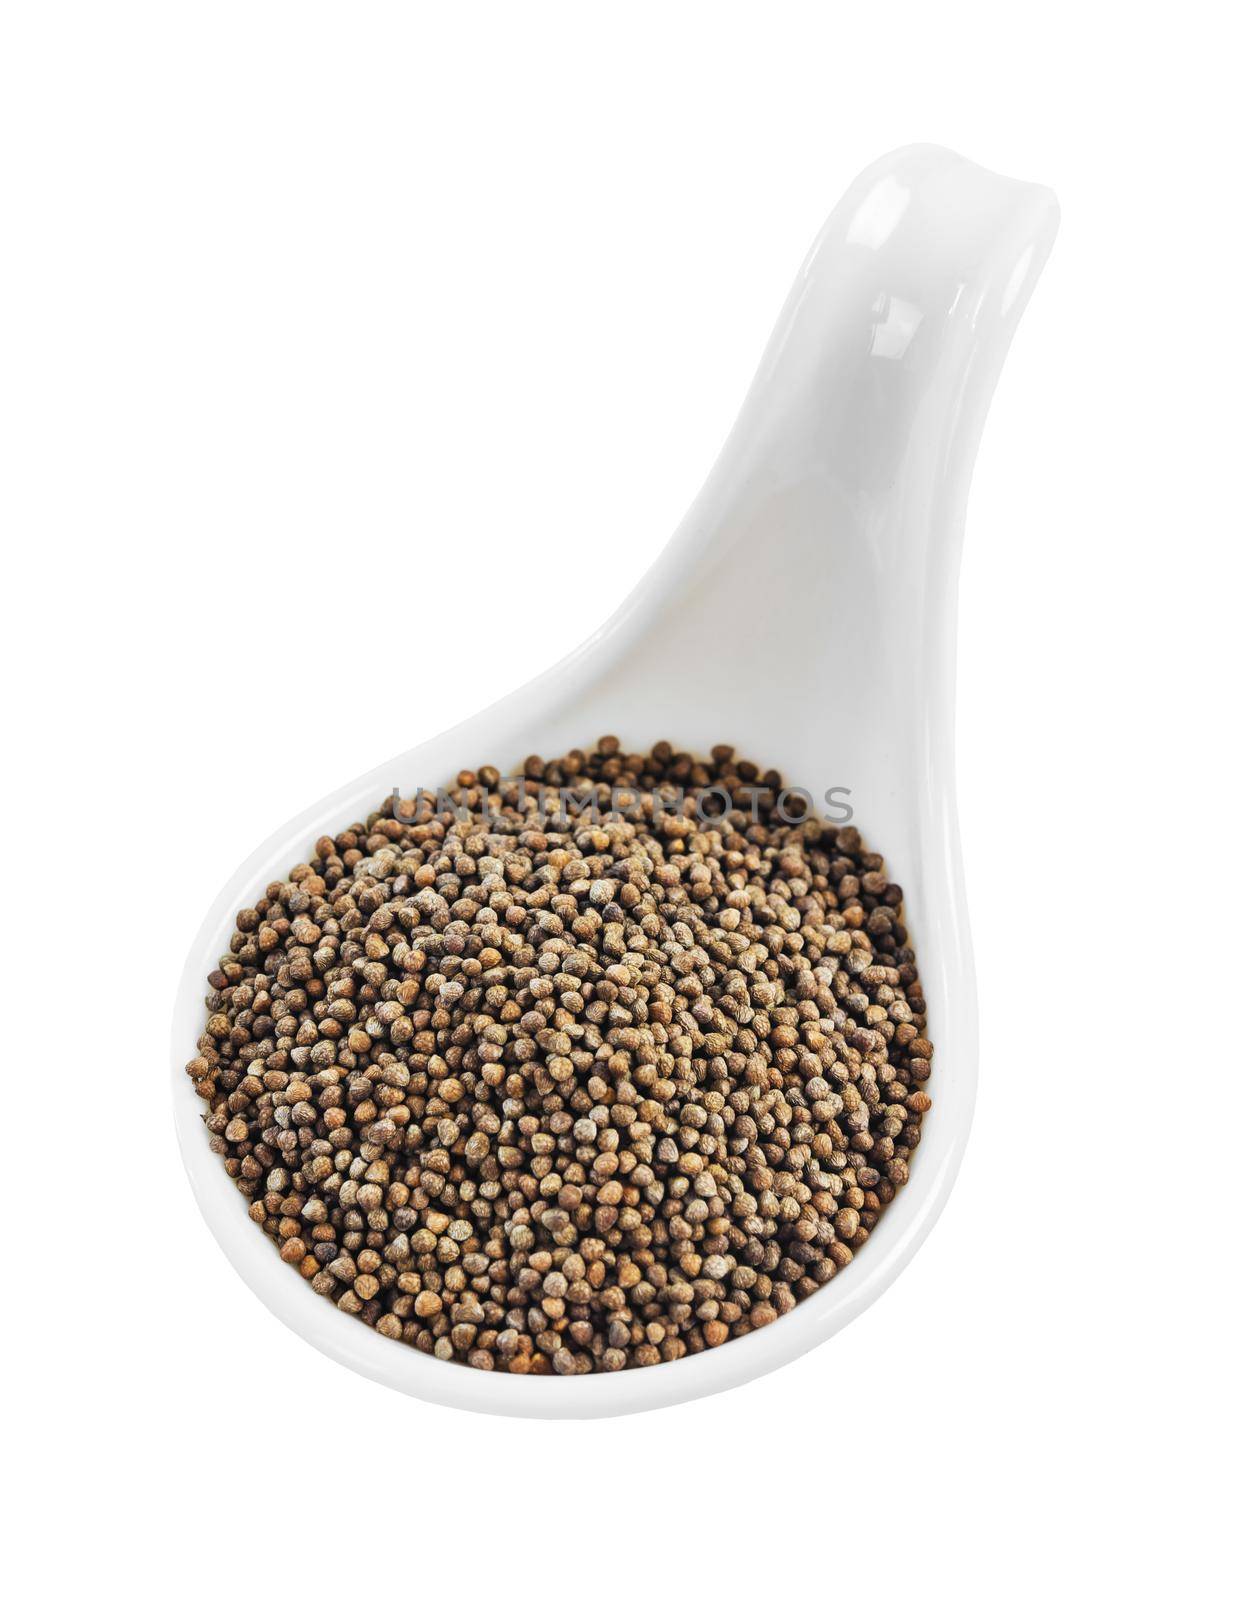 Perilla herb seeds in white spoon isolated on white background, Save clipping path.